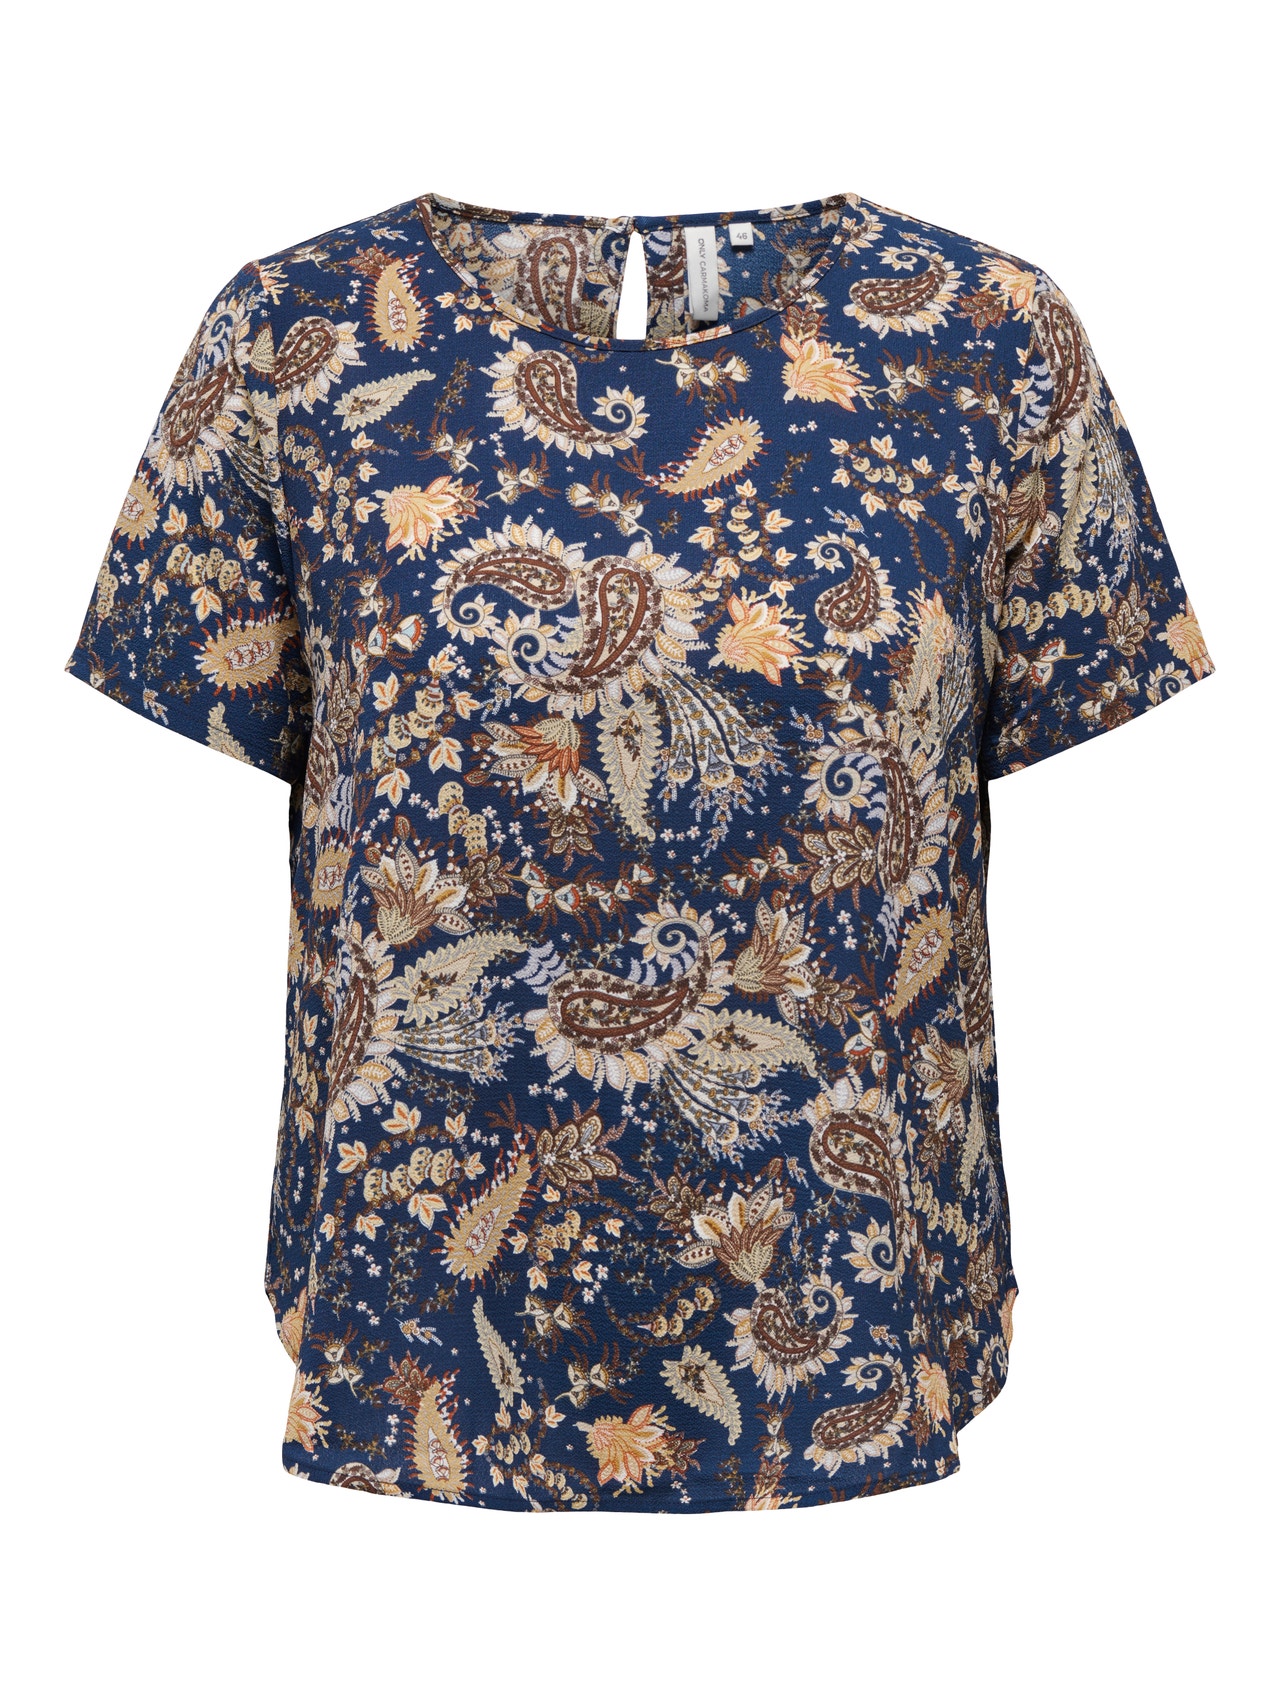 ONLY Curvy printed top -Twilight Blue - 15300676